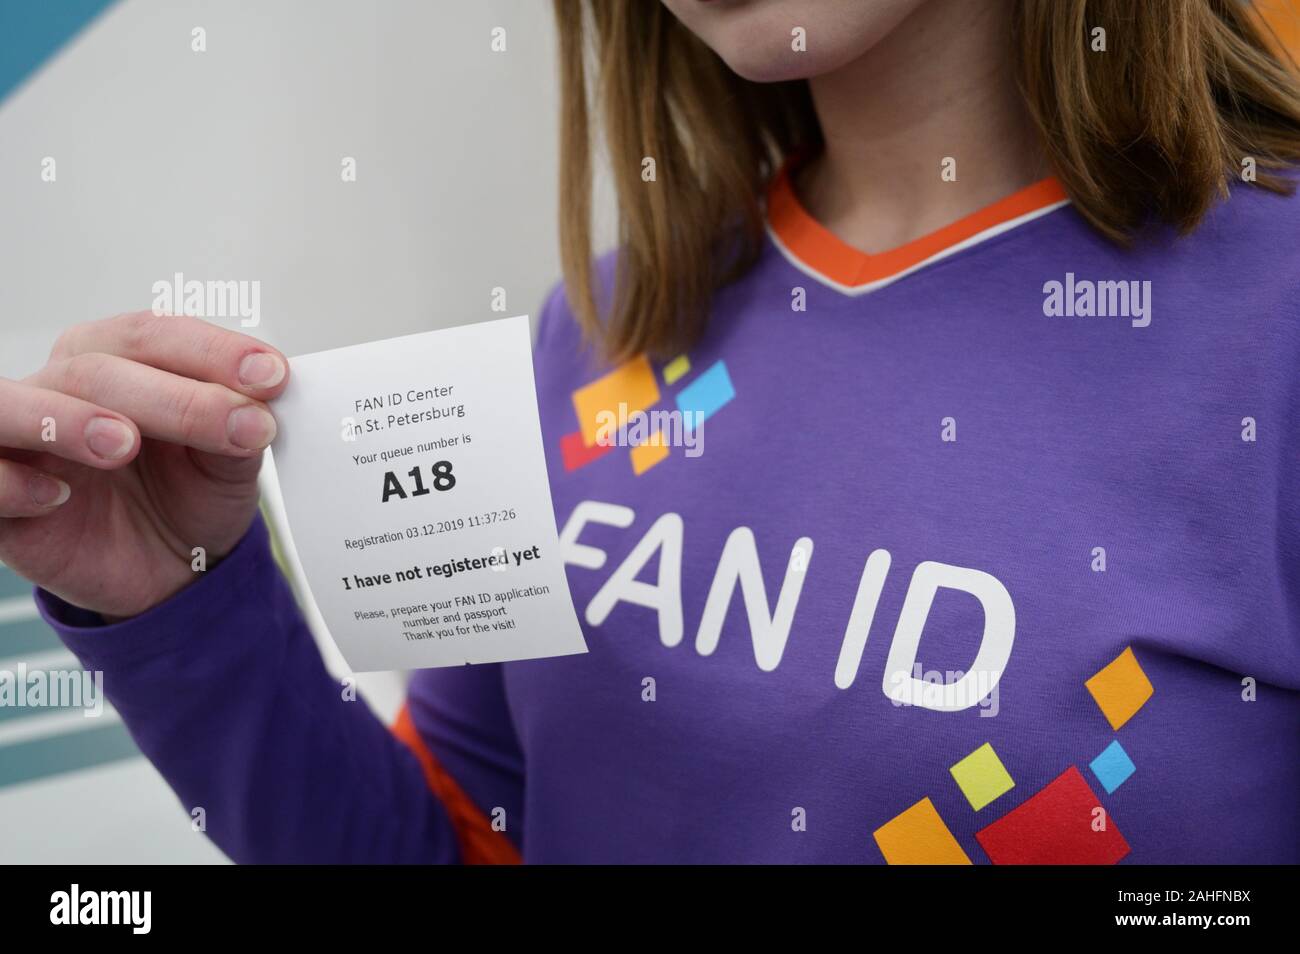 St. Petersburg, Russia - December 3, 2019: Employee holds the ticket of  electronic queue during the opening of the Fan ID Center for UEFA Euro  2020. Three group matches and quarterfinal will